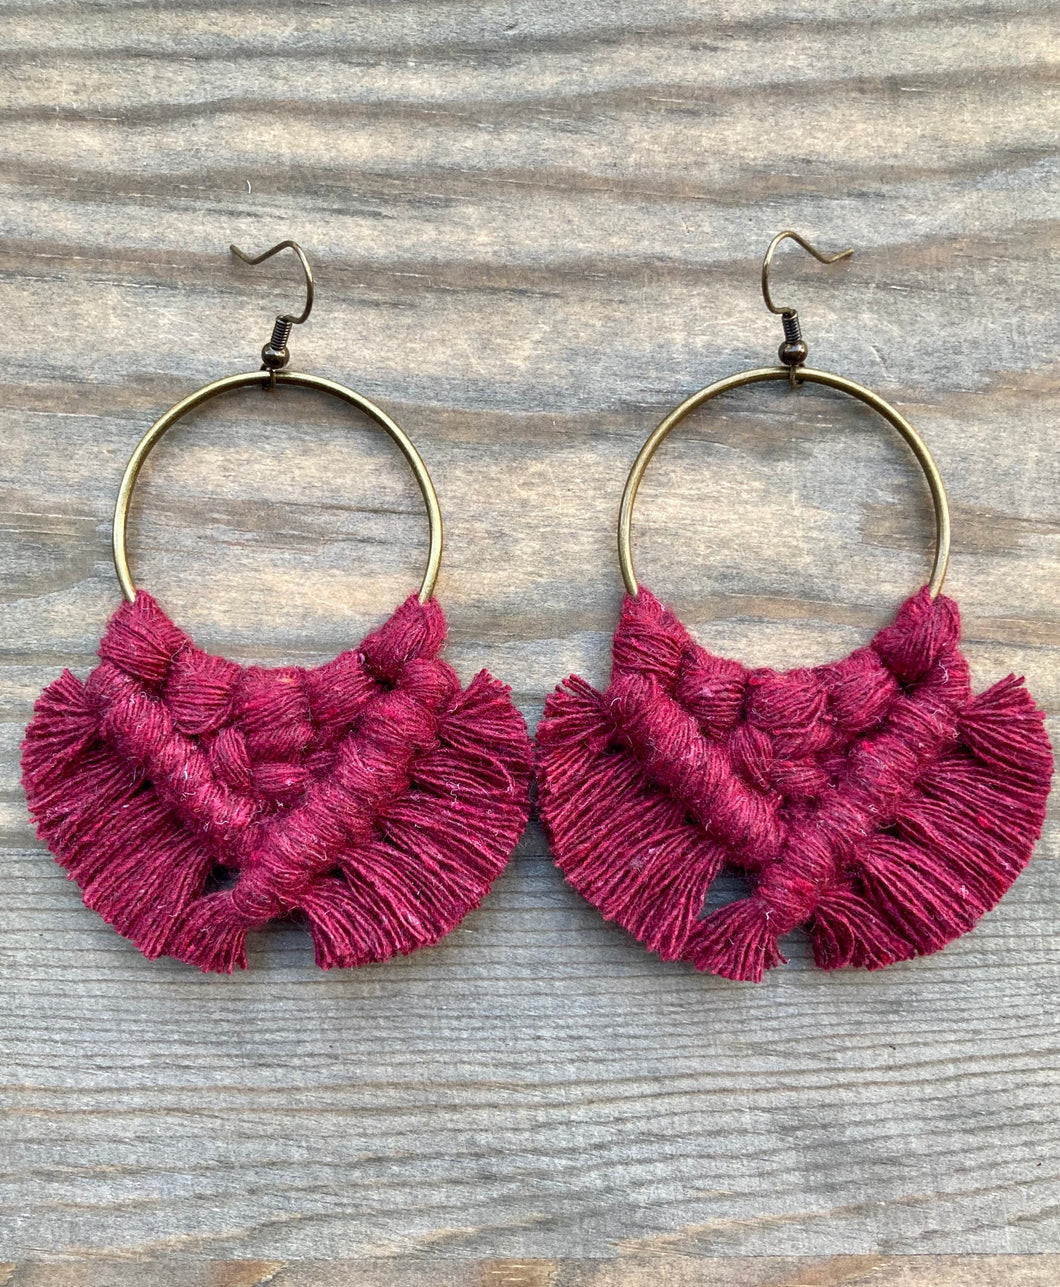 Large Square Knot Earrings - Burgundy & Bronze